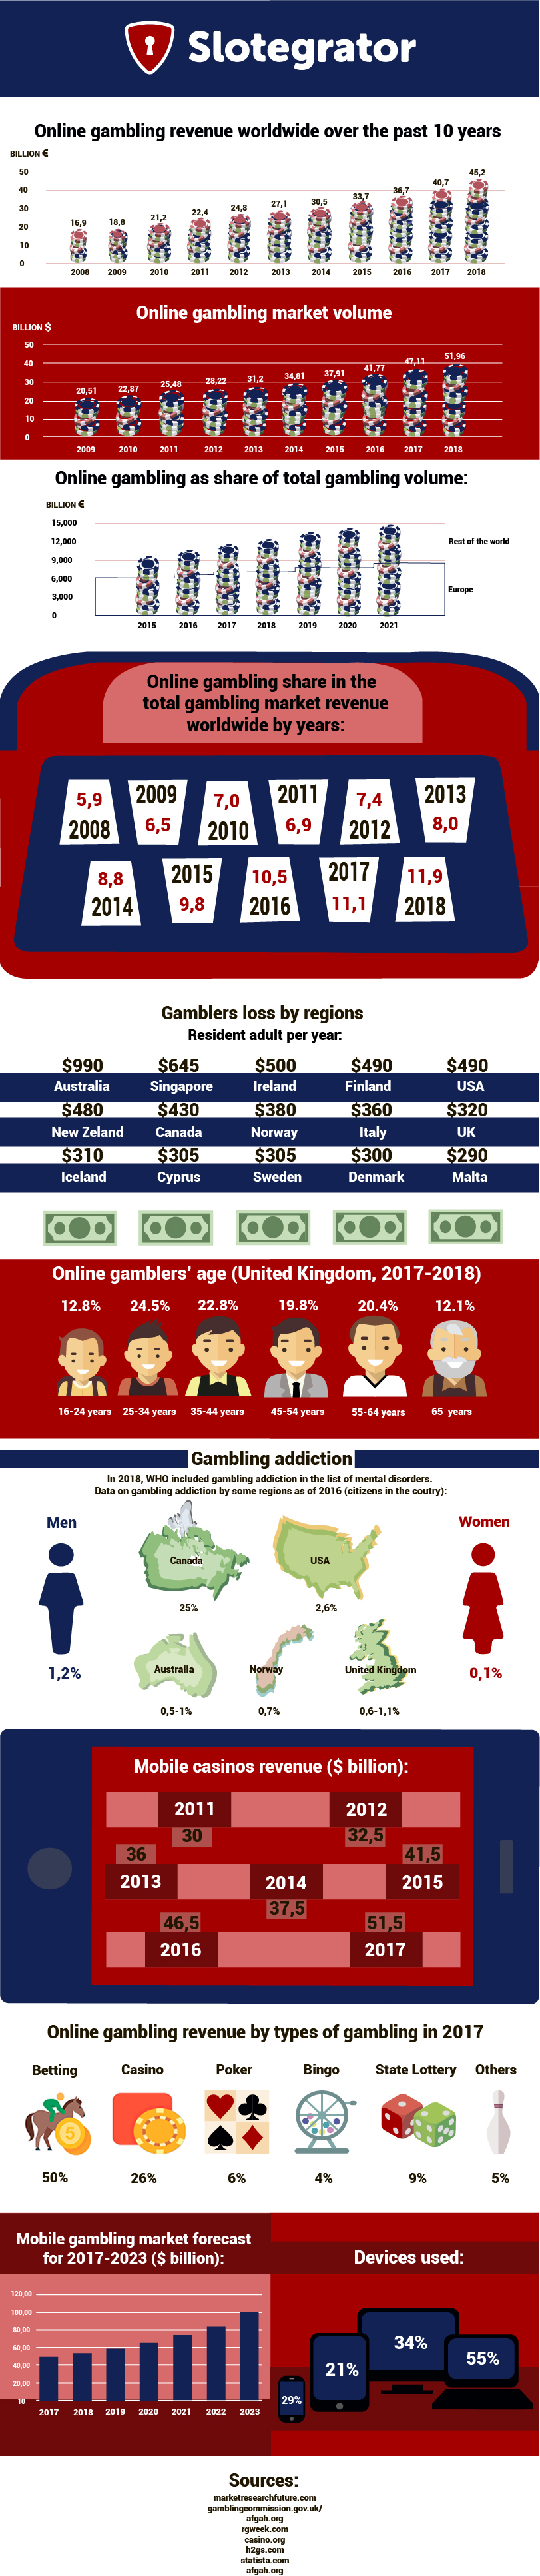 New Infographic That Provides Worldwide Online Gambling Statistics By Slotegrator